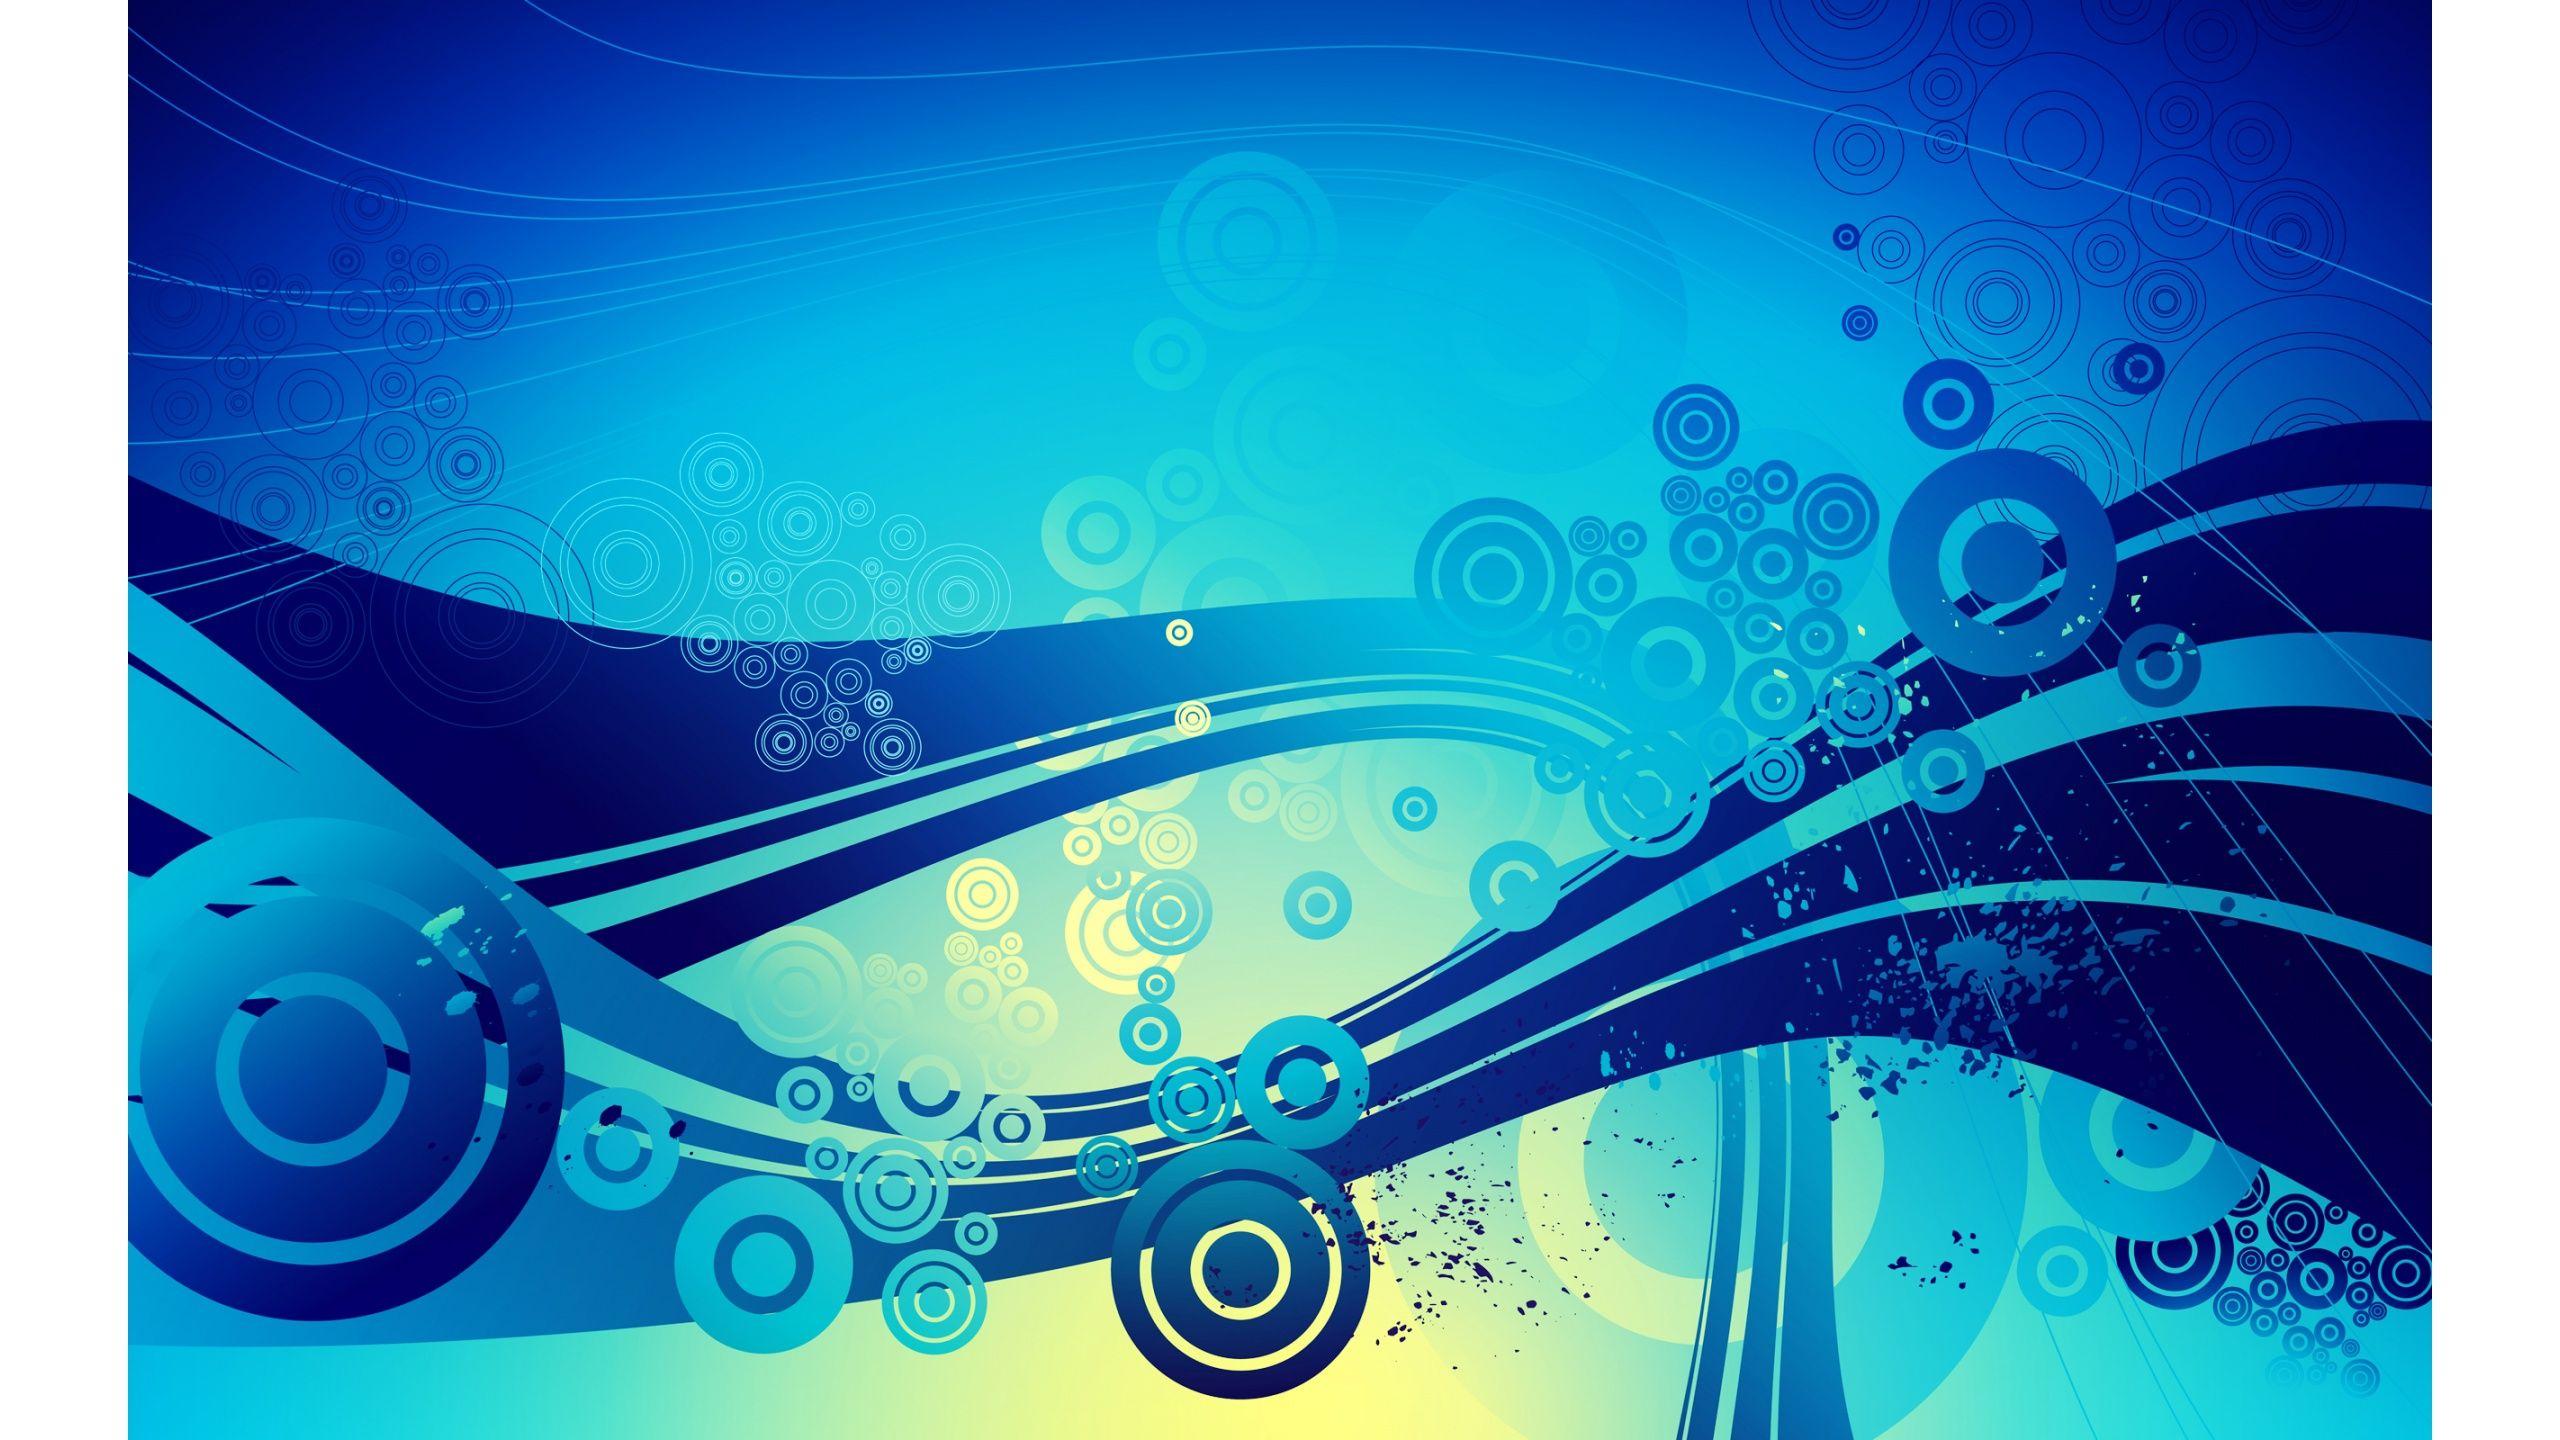 Abstract Circles Flowing Wallpaper In 2560x1440 Resolution Free